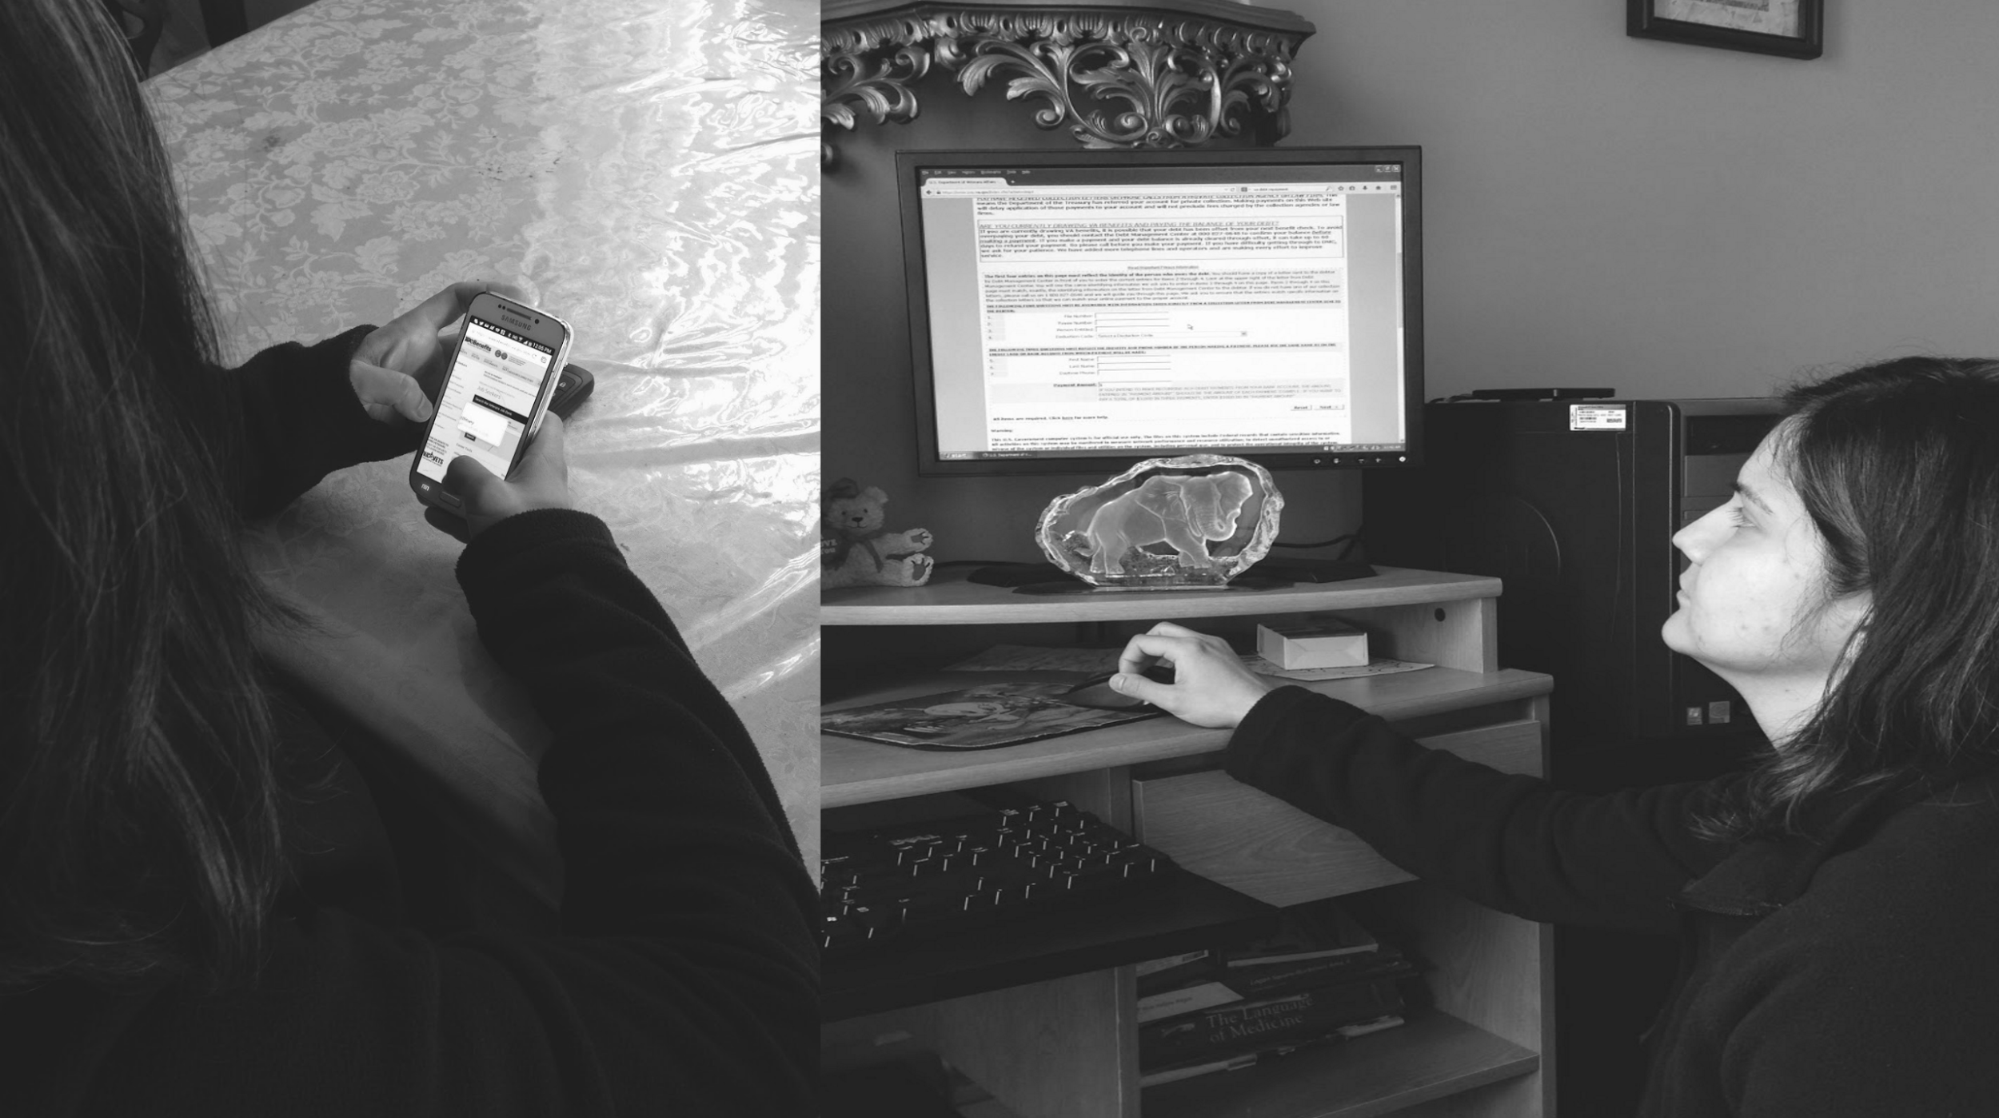 Split images in black and white image of a veteran. Left image is of a woman holding a phone navigating a phone app. Right image of same woman navigating a website on a desktop computer